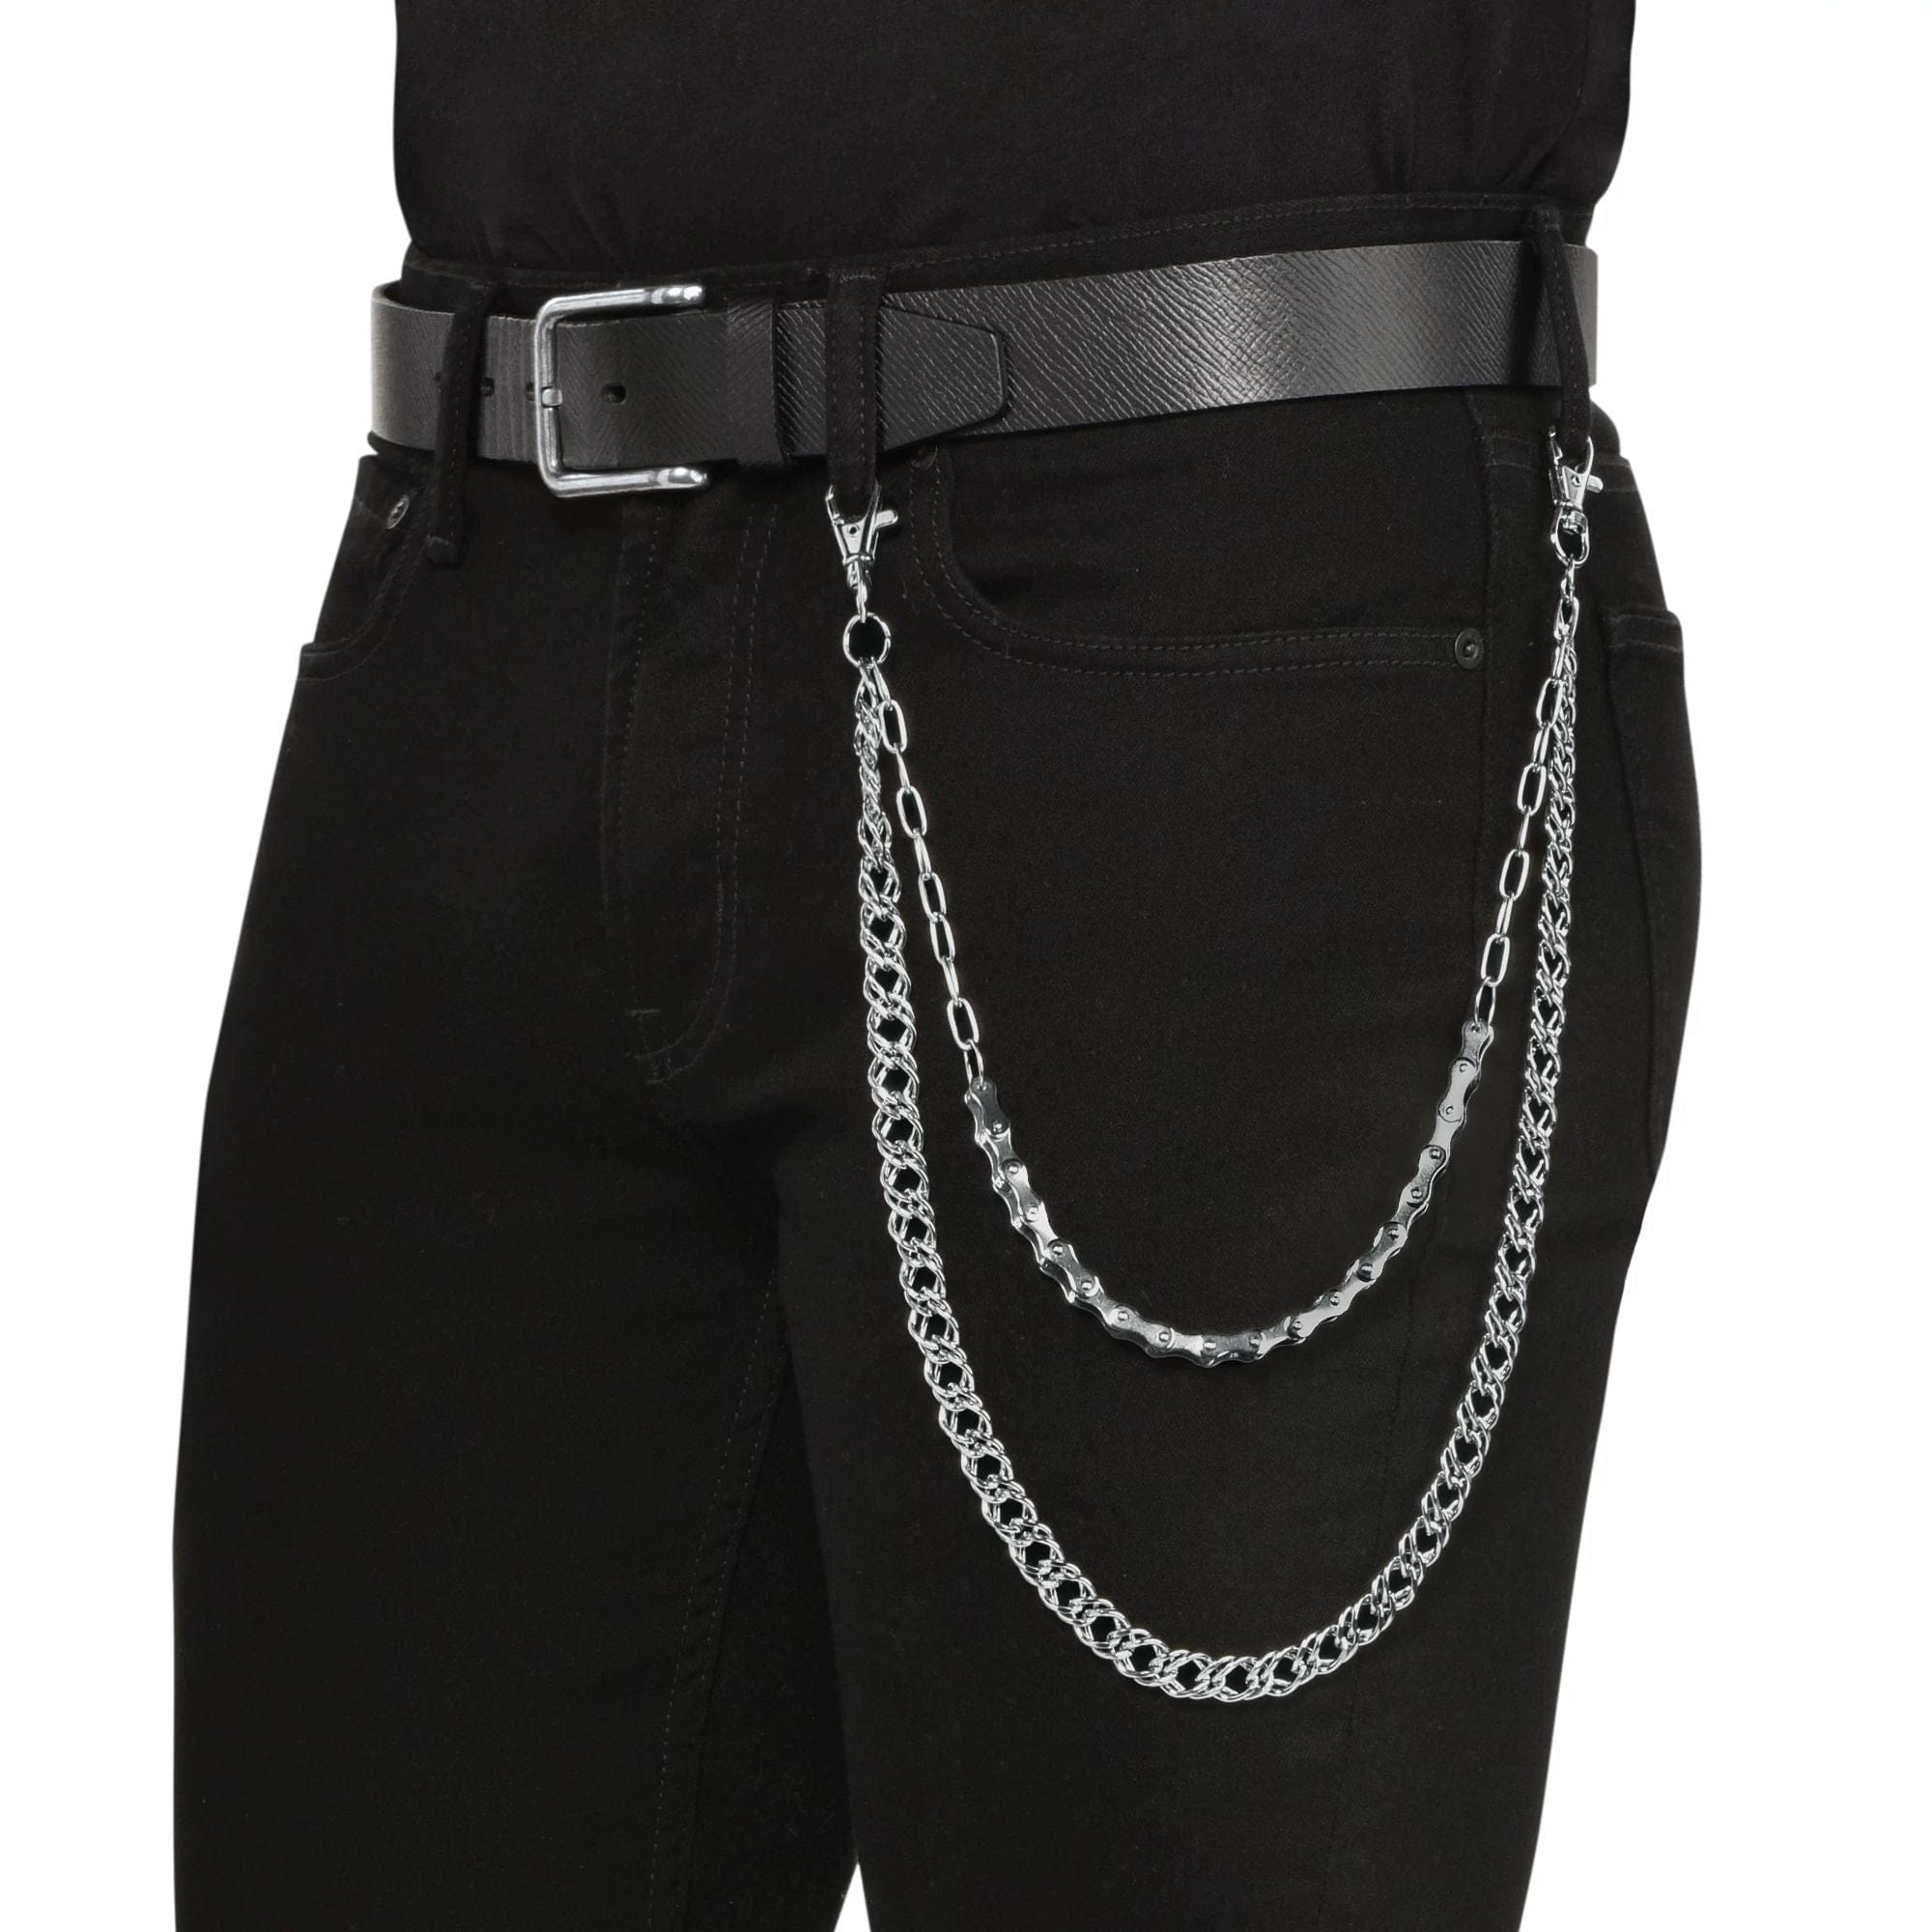 Amscan COSTUMES: ACCESSORIES Chain Layered Belt